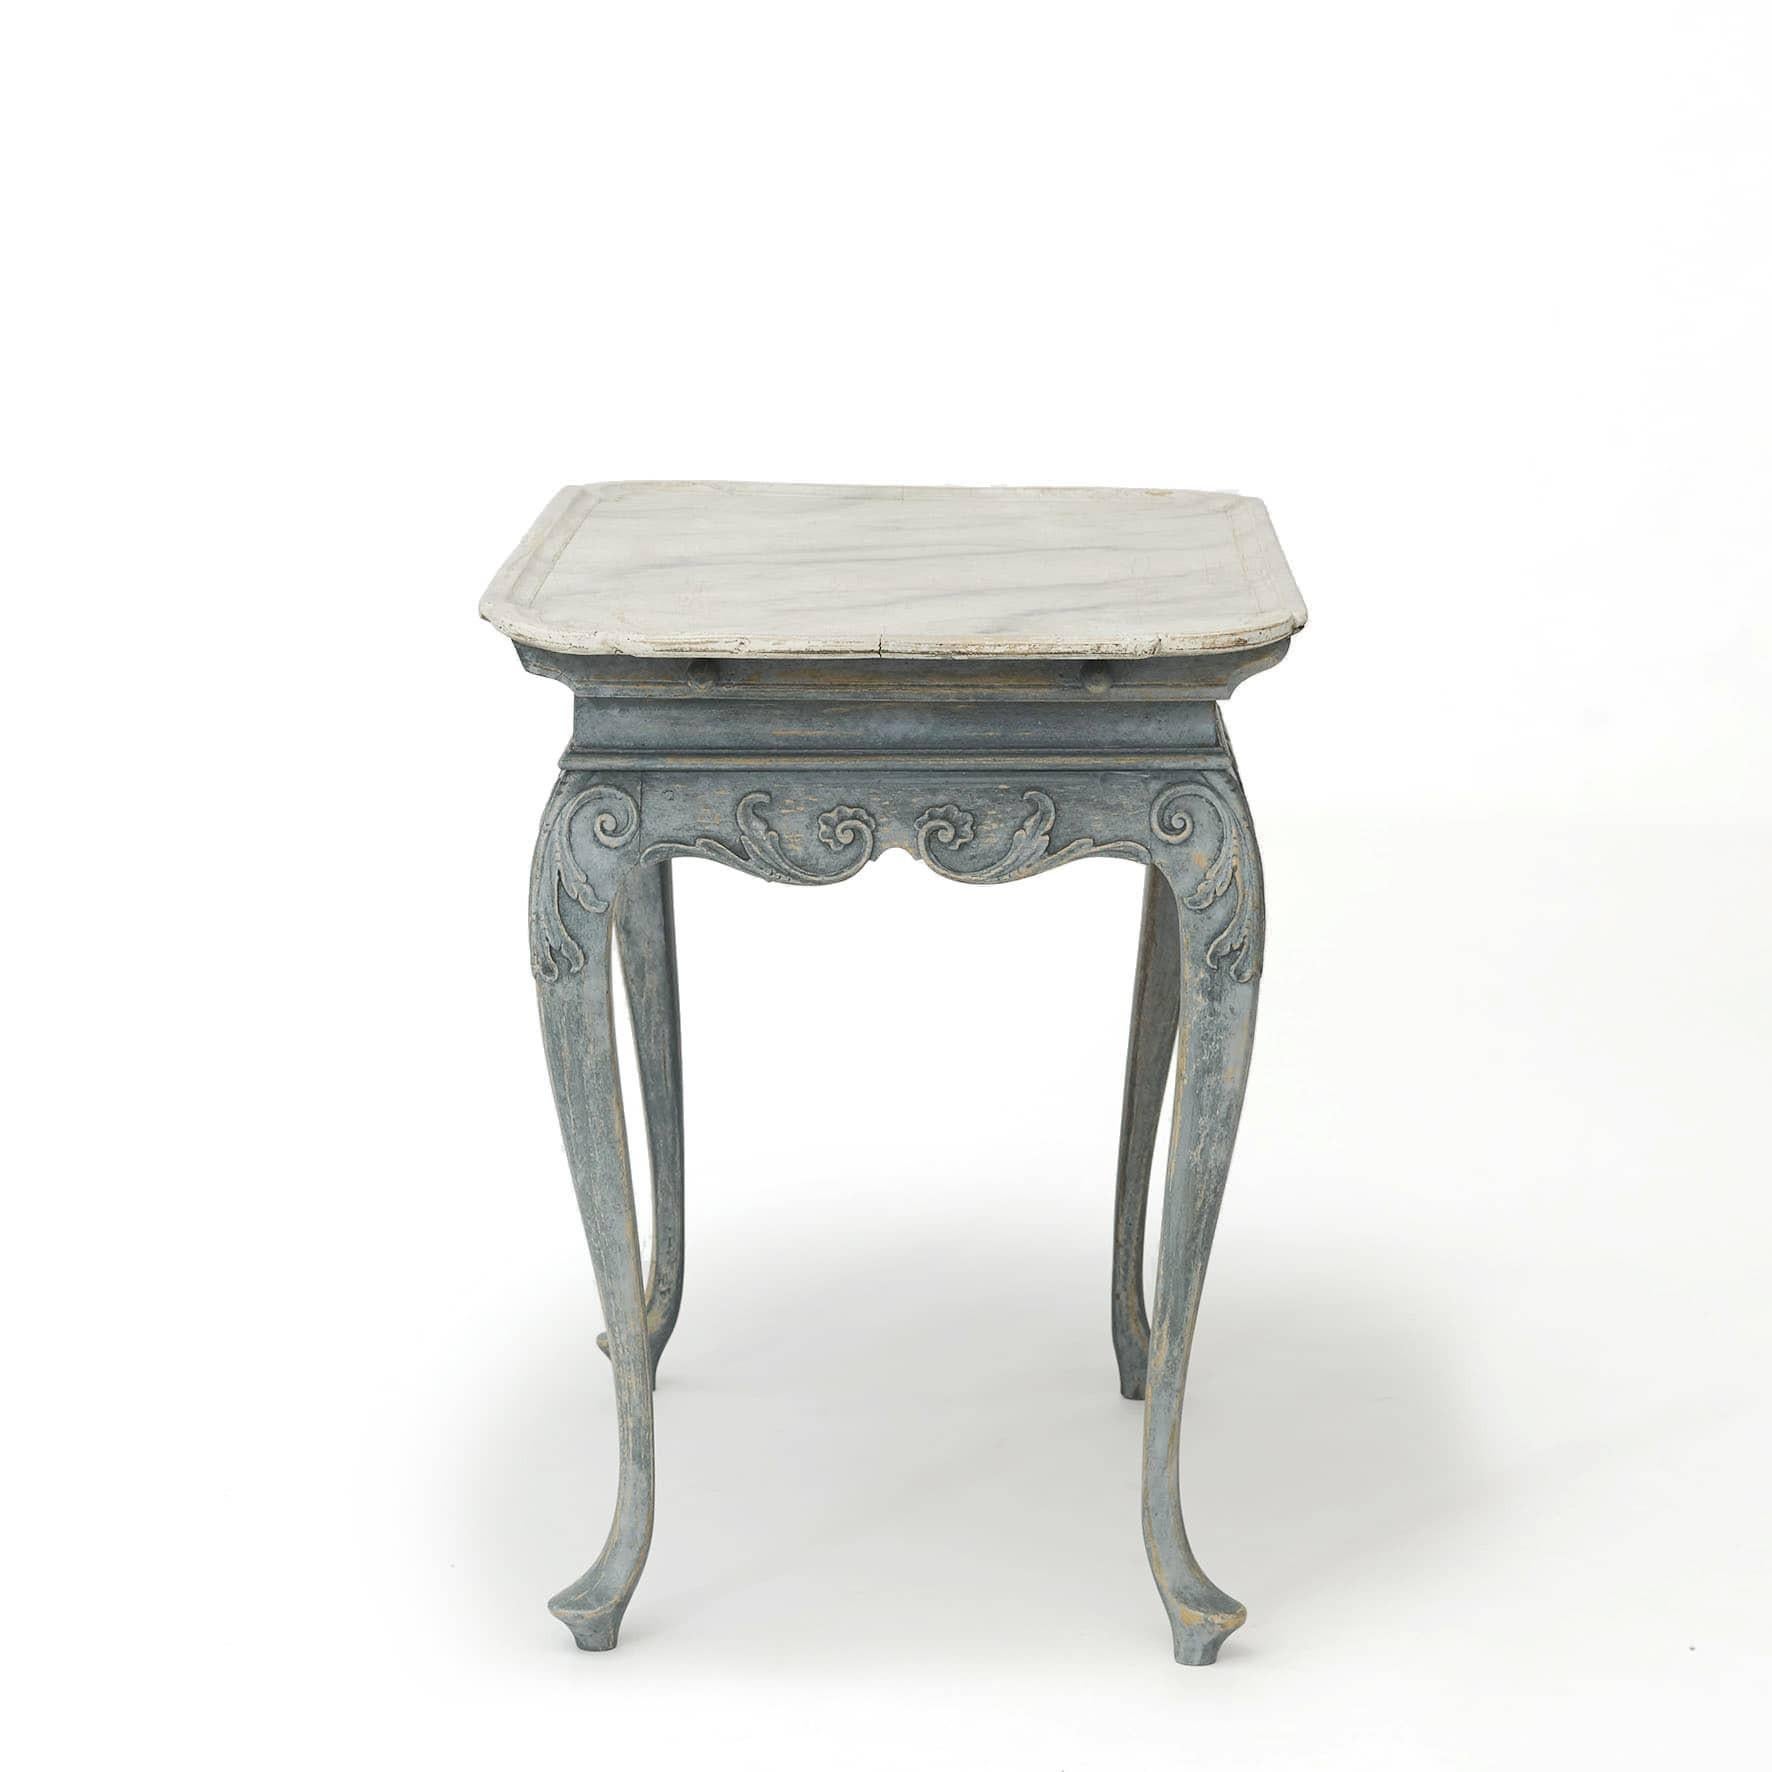 A lovely Danish antique rococo tray table.

The table is finished with a (professional conservator restored) dusty blue base and a soft grey painted faux marble top.
Base with foliate and rocailles carved skirt raised on cabriole legs.

A